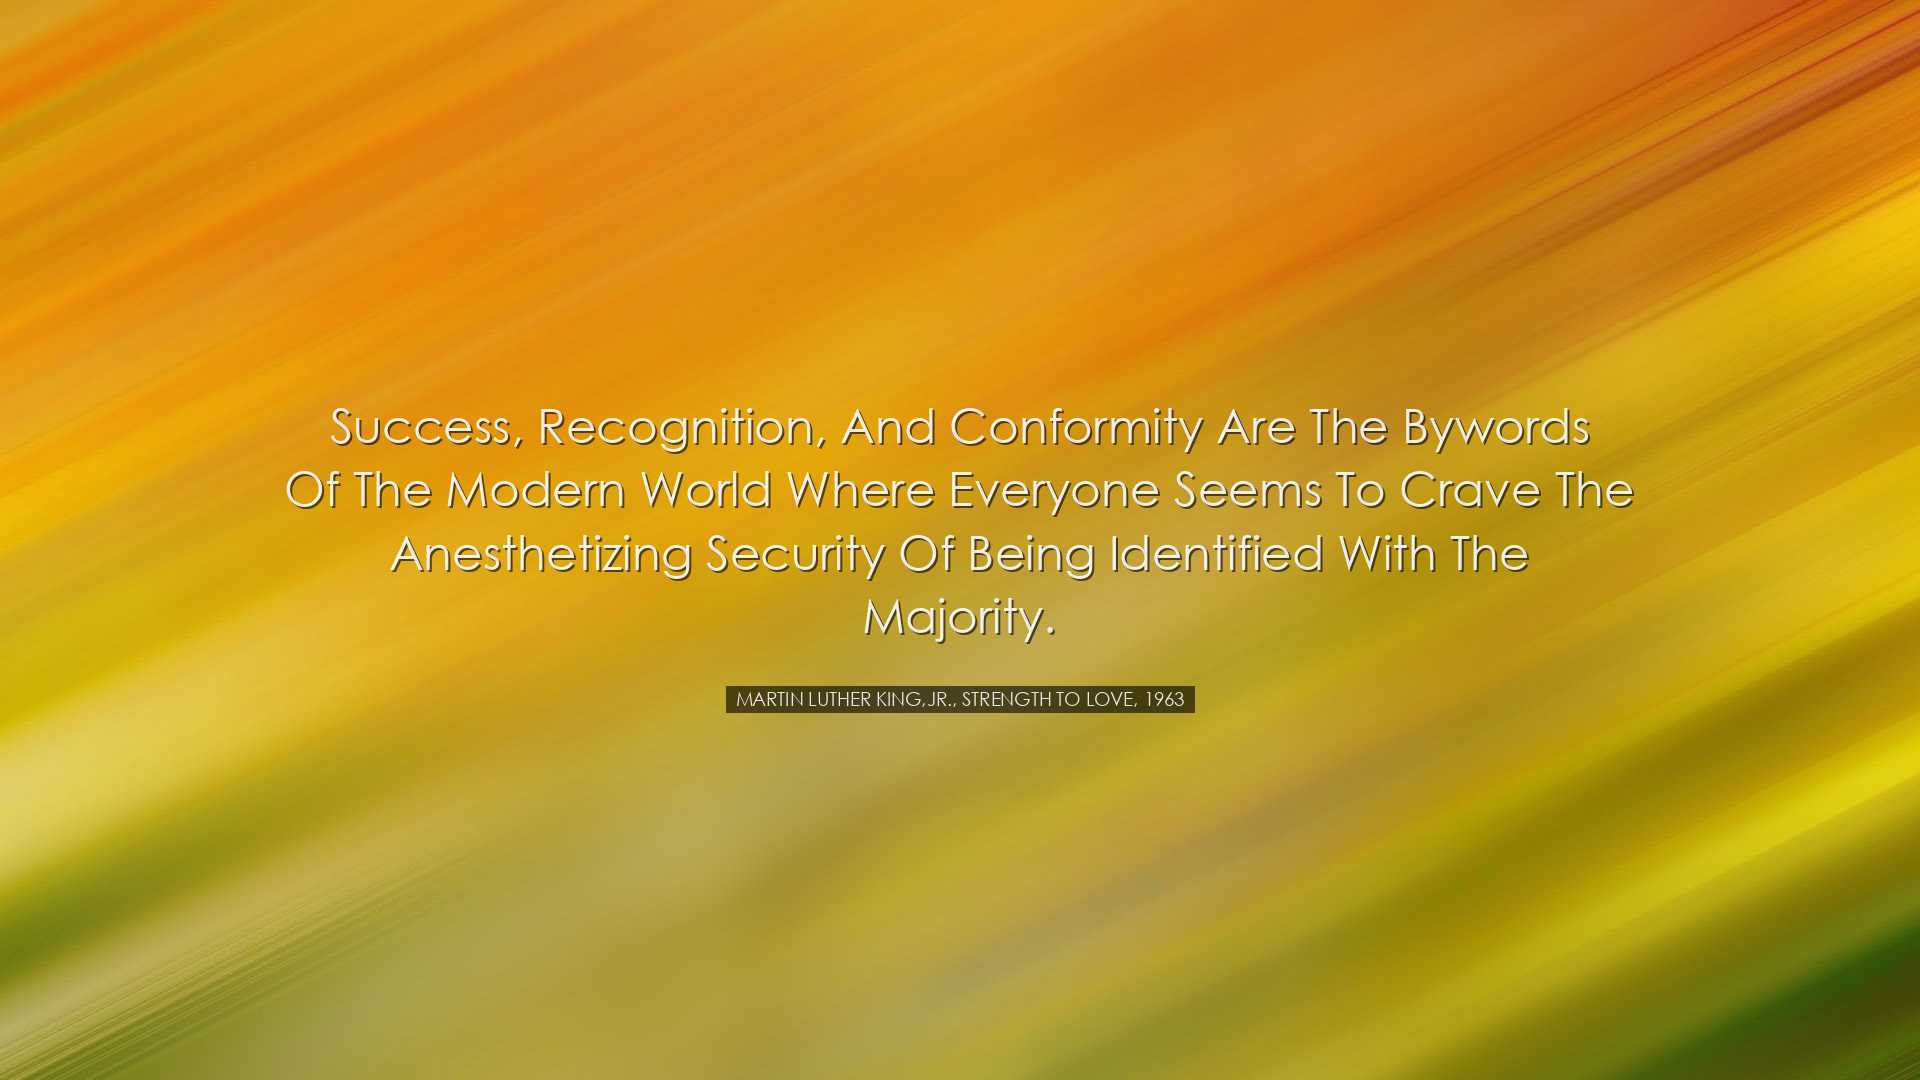 Success, recognition, and conformity are the bywords of the modern